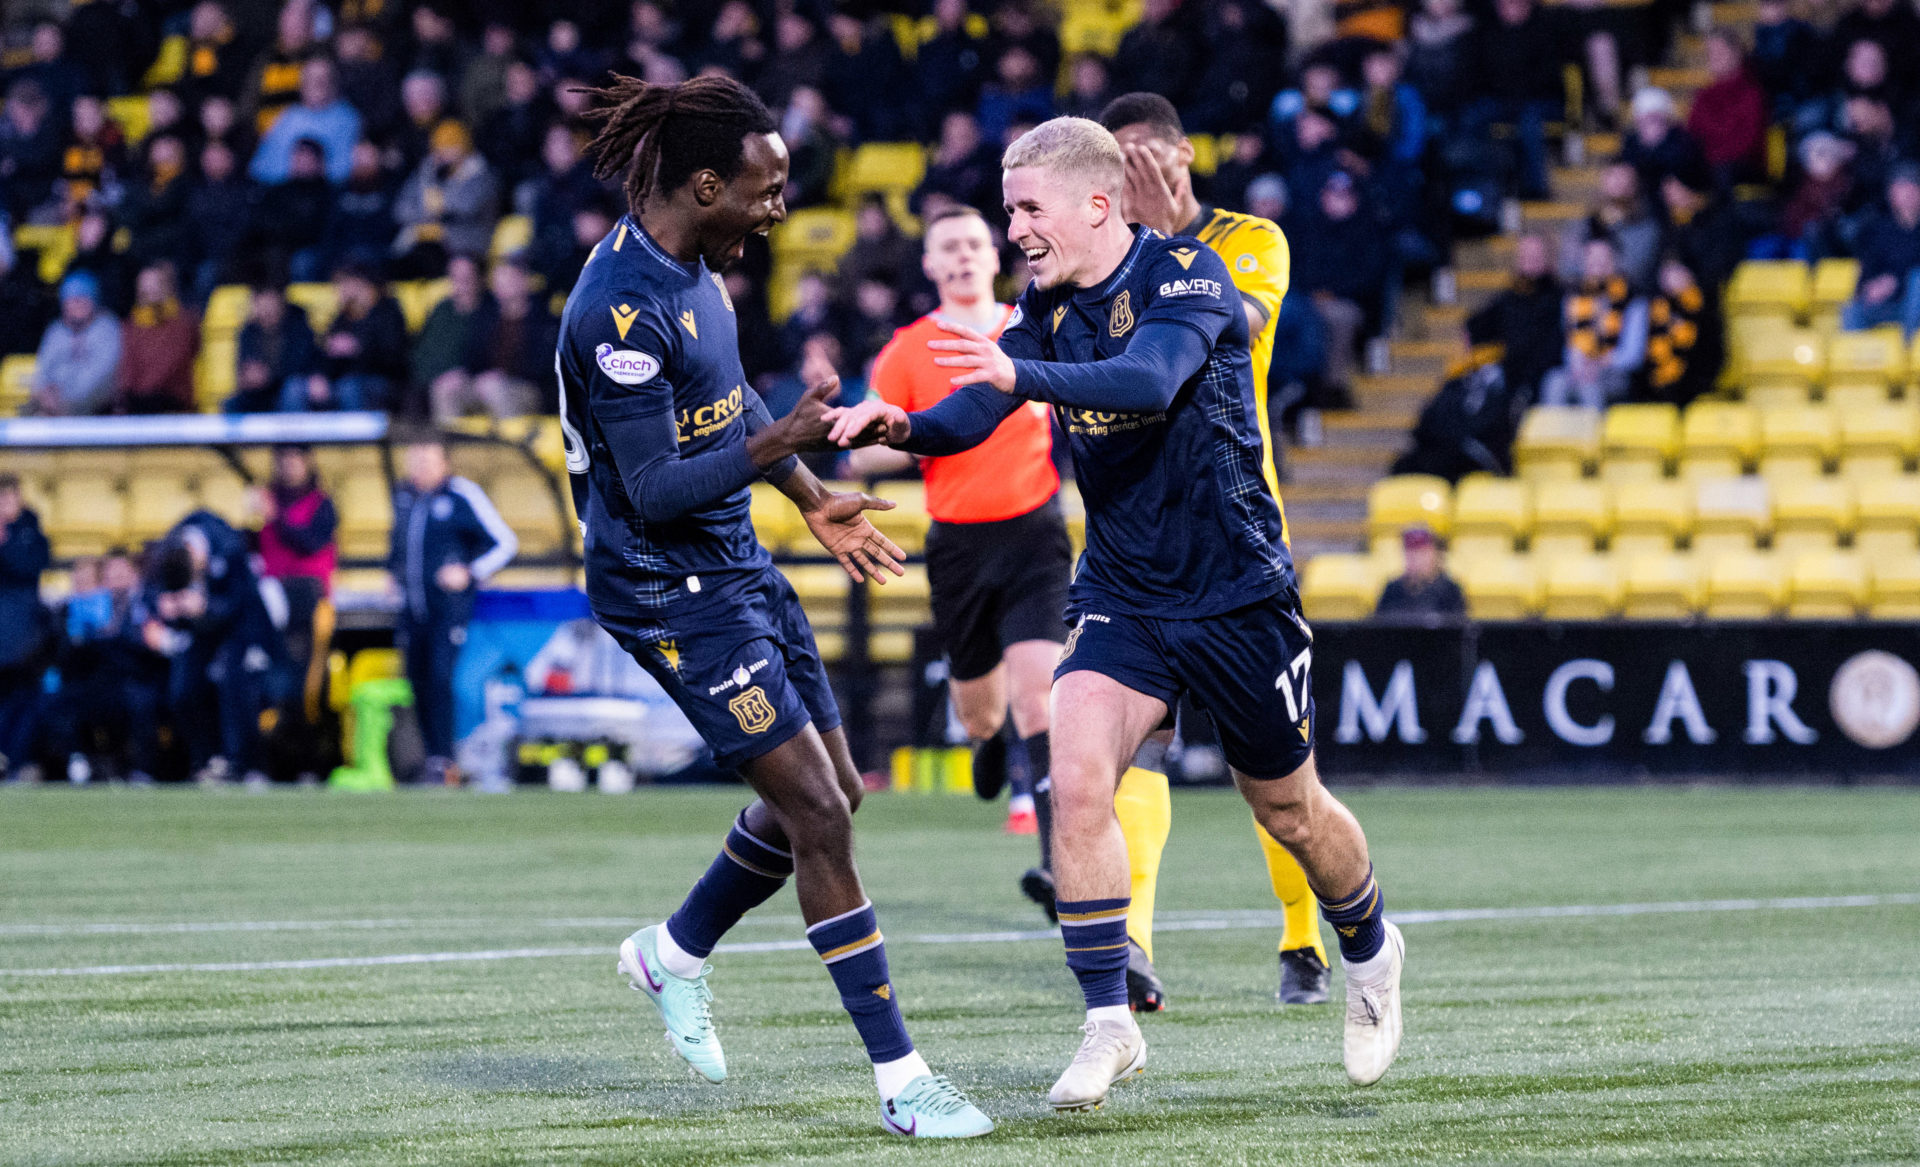 Mistakes cost Livingston as 10 man Dundee cruise to victory